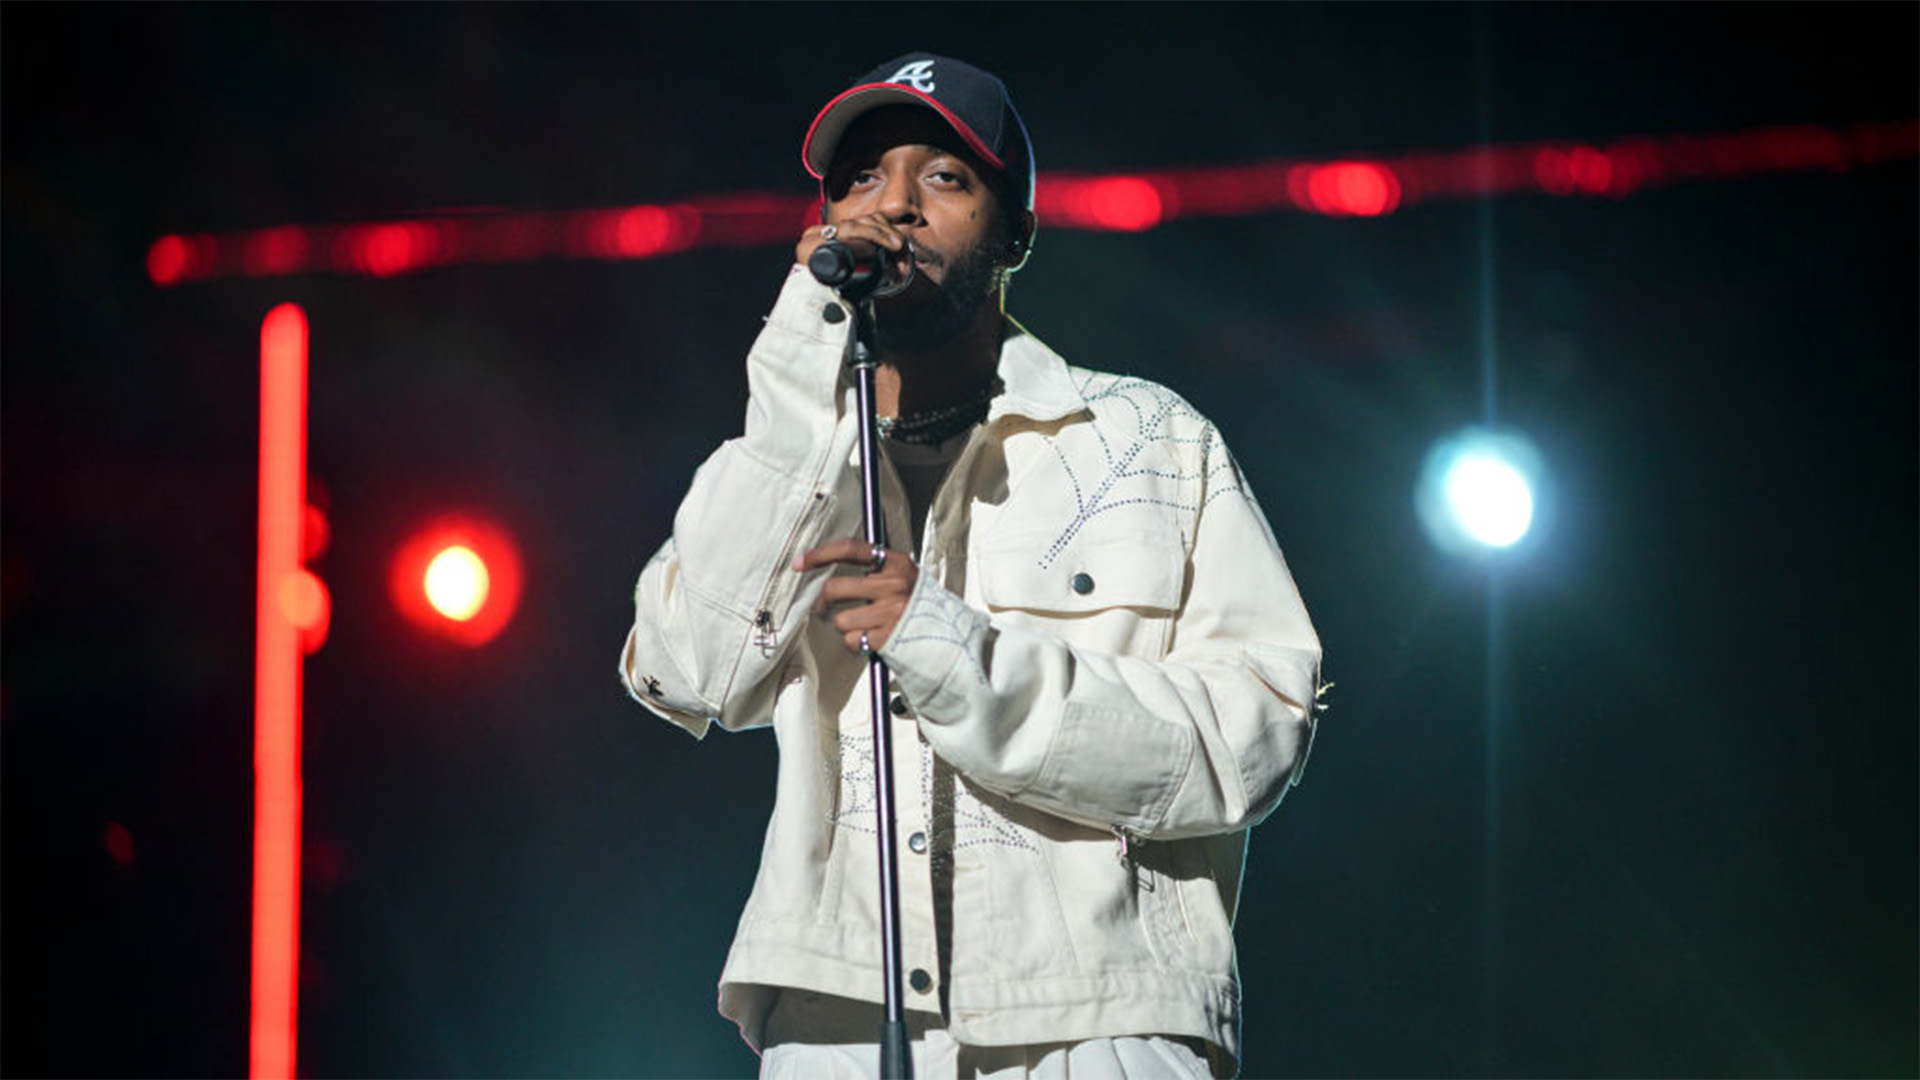 6LACK Credits 'Being Able To Grow With Technology' For His Success As A Musician